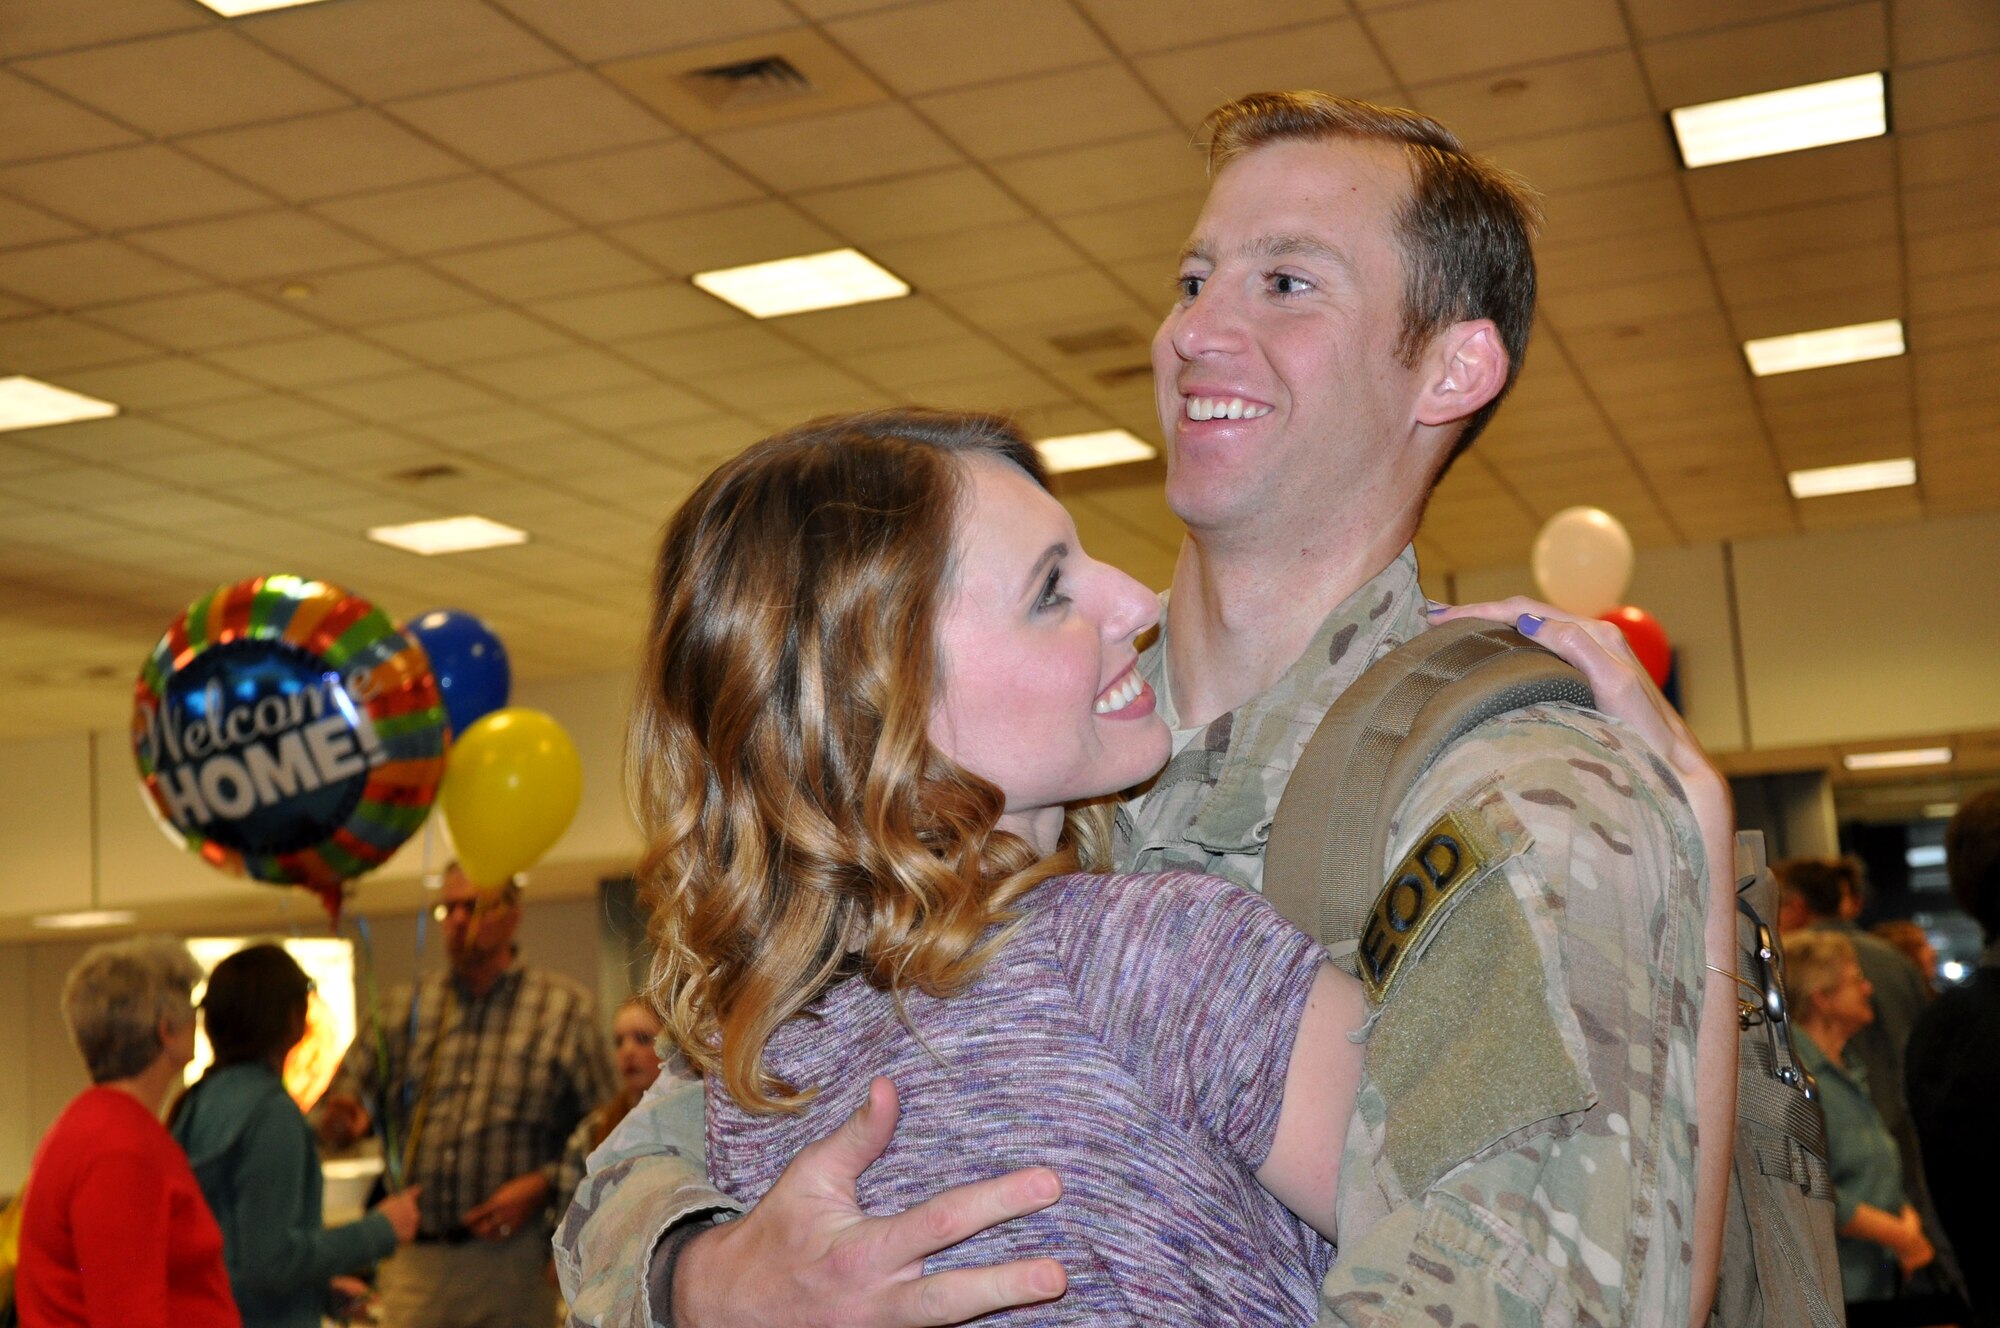 Staff Sgt. Tim Zupancic embraces his wife, Stephanie, after his return from a six-month deployment to Southwest Asia. “We’ve only been married nine months,” Stephanie said. “It’s been a long six months without him.” Zupancic and three other reservists from the 419th Fighter Wing’s explosive ordnance disposal flight returned home April 27. (U.S. Air Force photo/Bryan Magaña)
 
